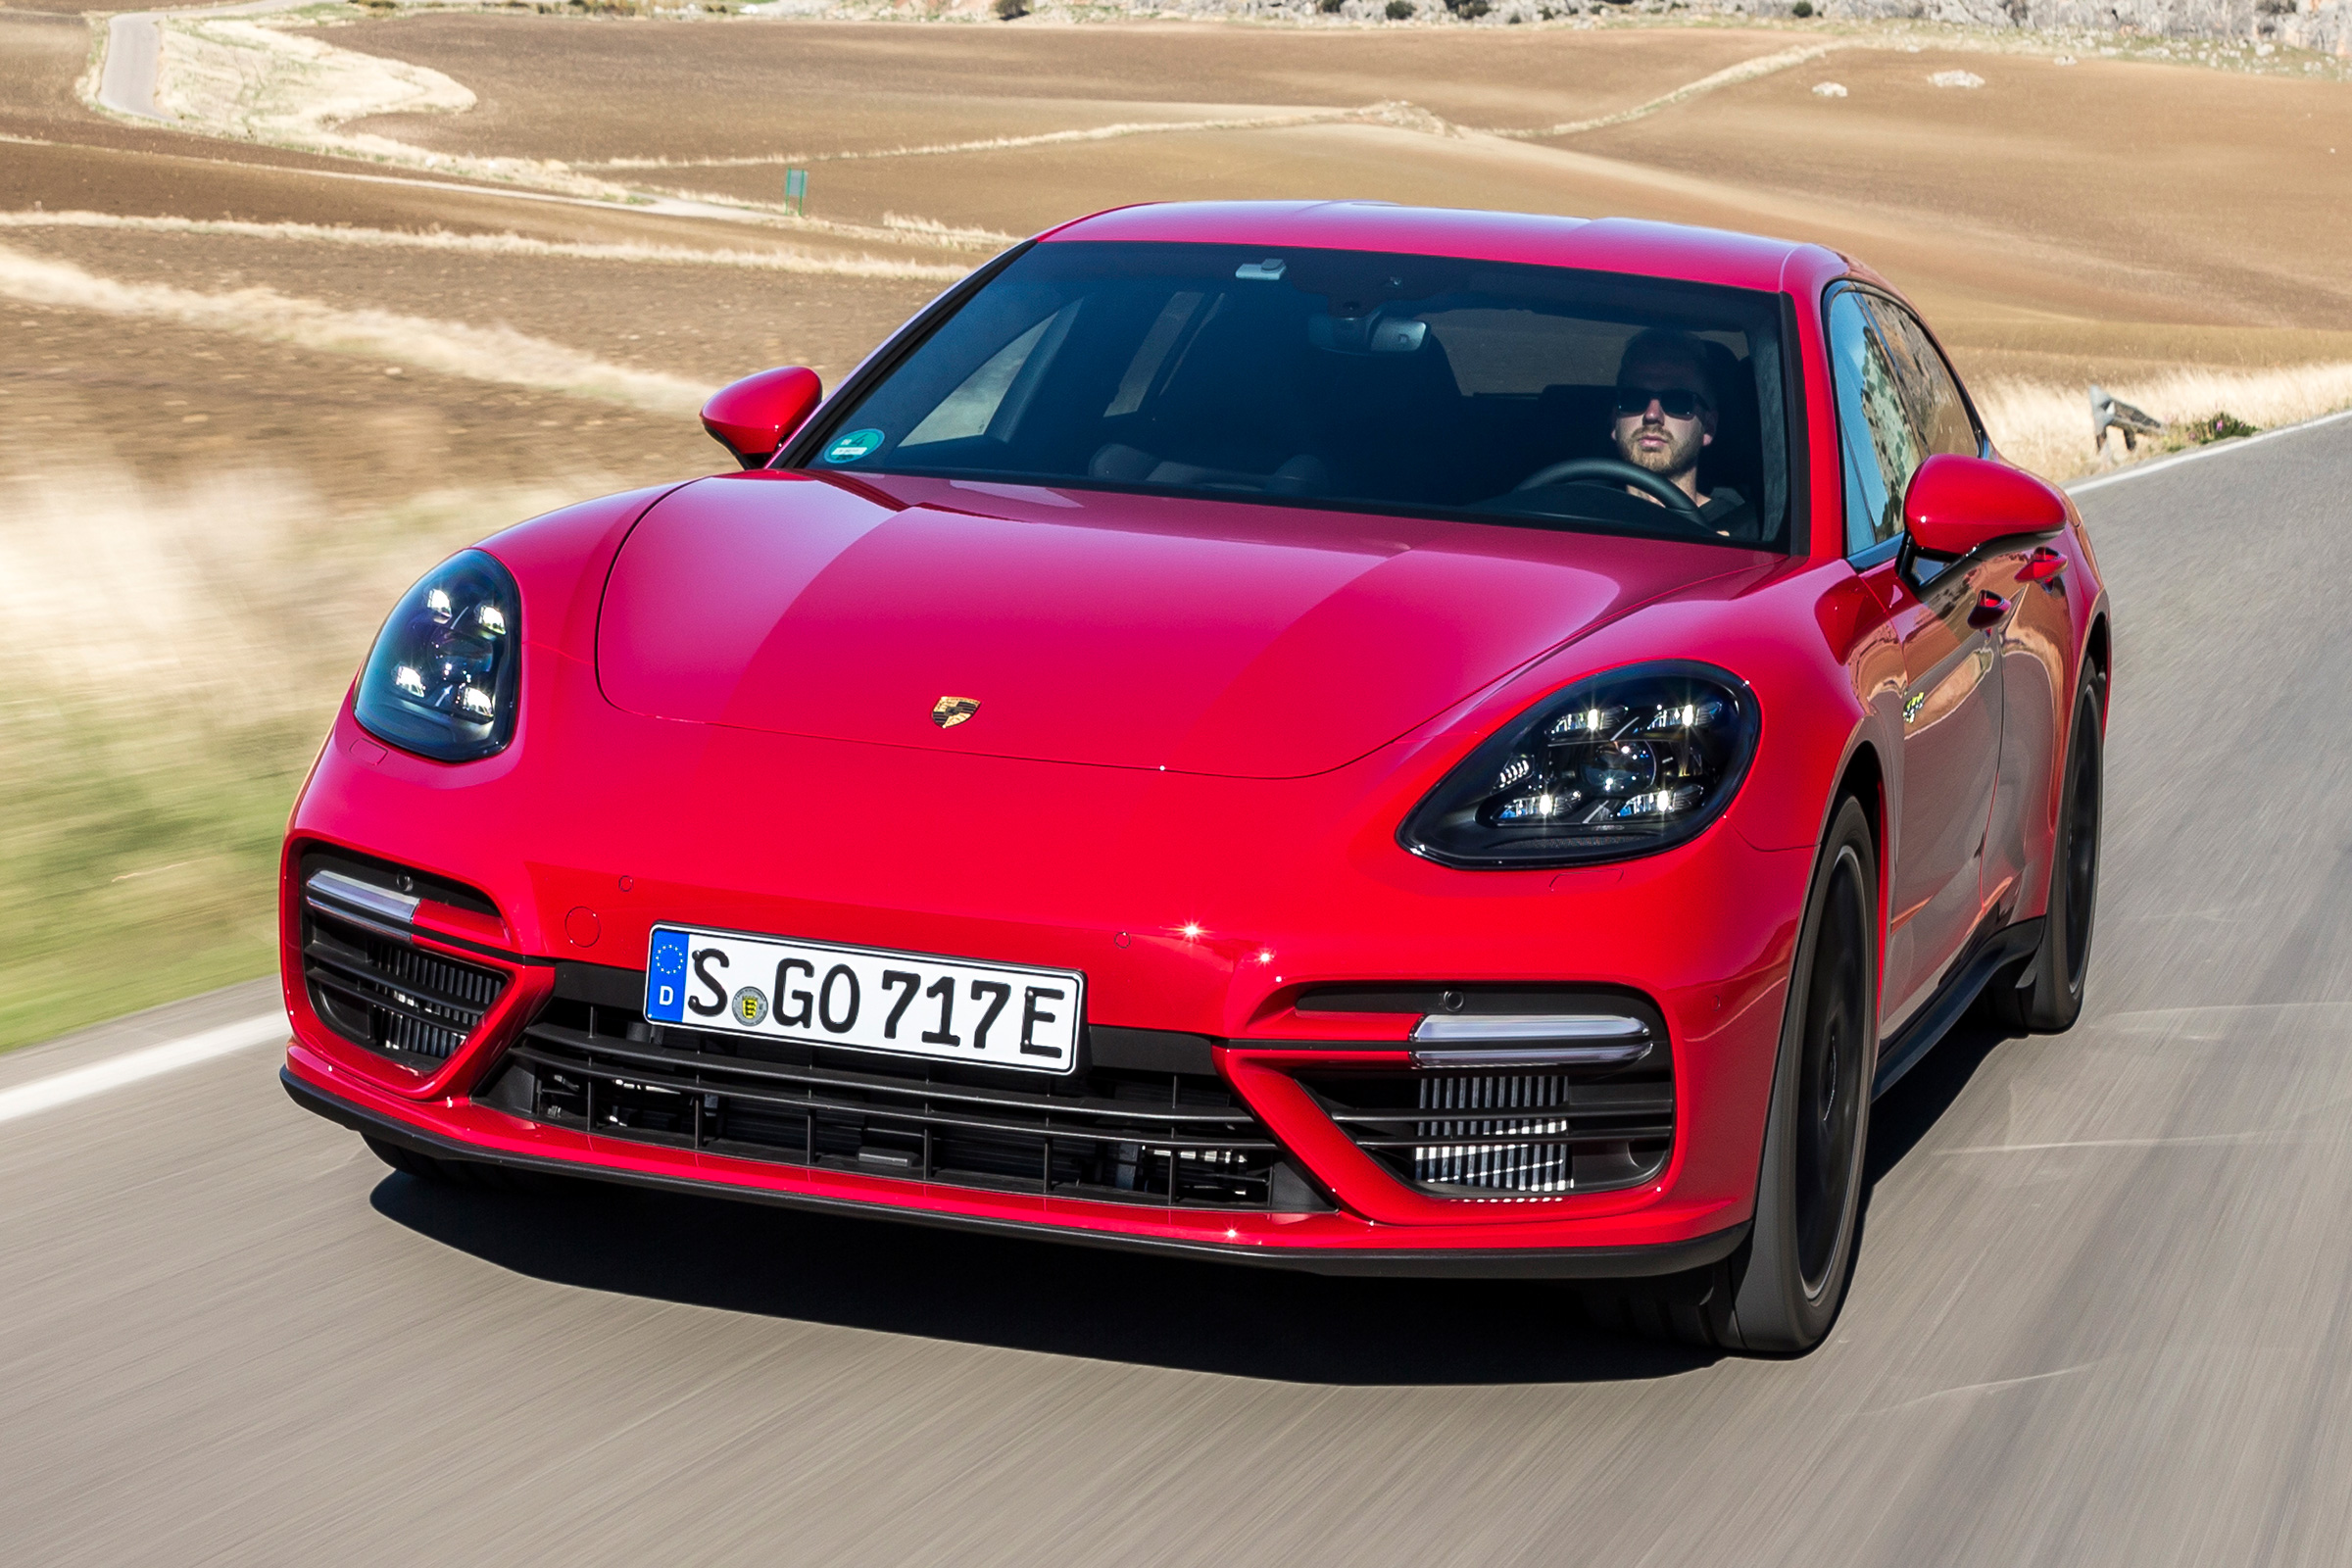 26 Top Pictures Panamera Sport Turismo Review : One Week With: 2018 Porsche Panamera 4S Sport Turismo ...